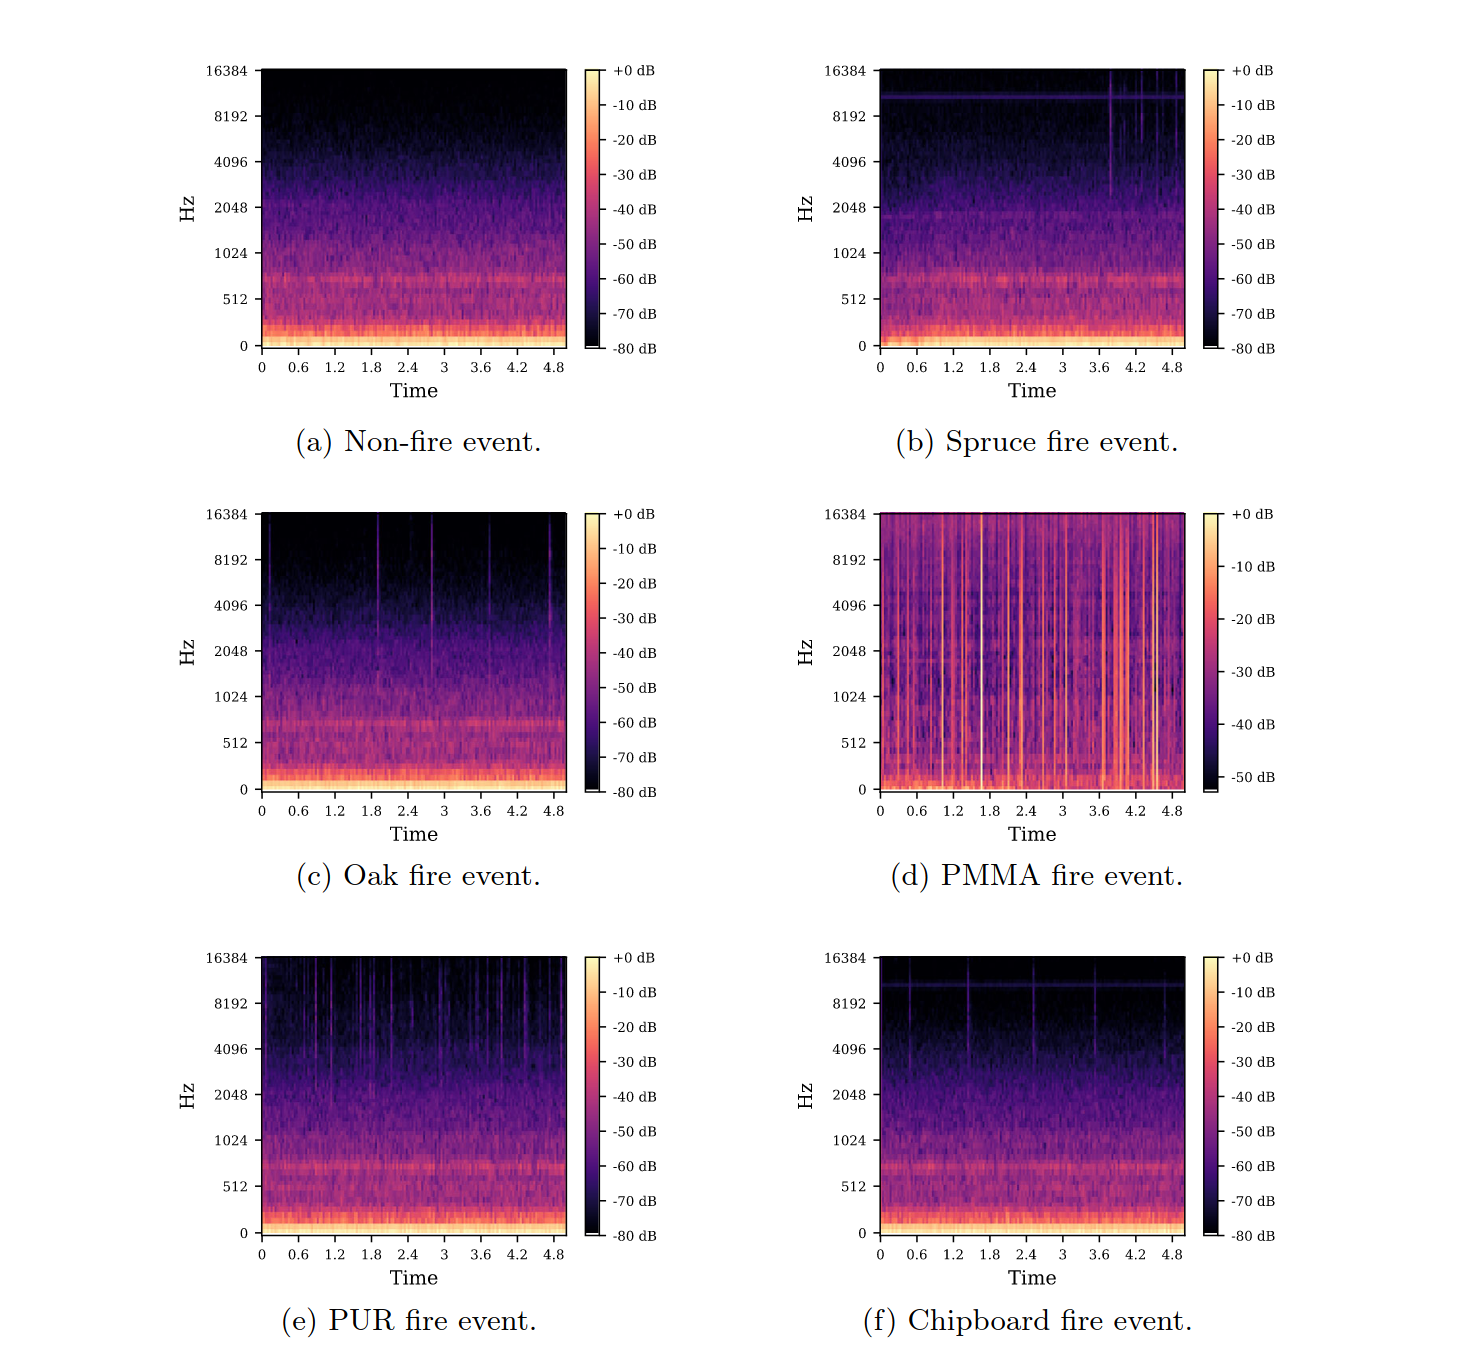 Spectrograms of fire events of different categories.